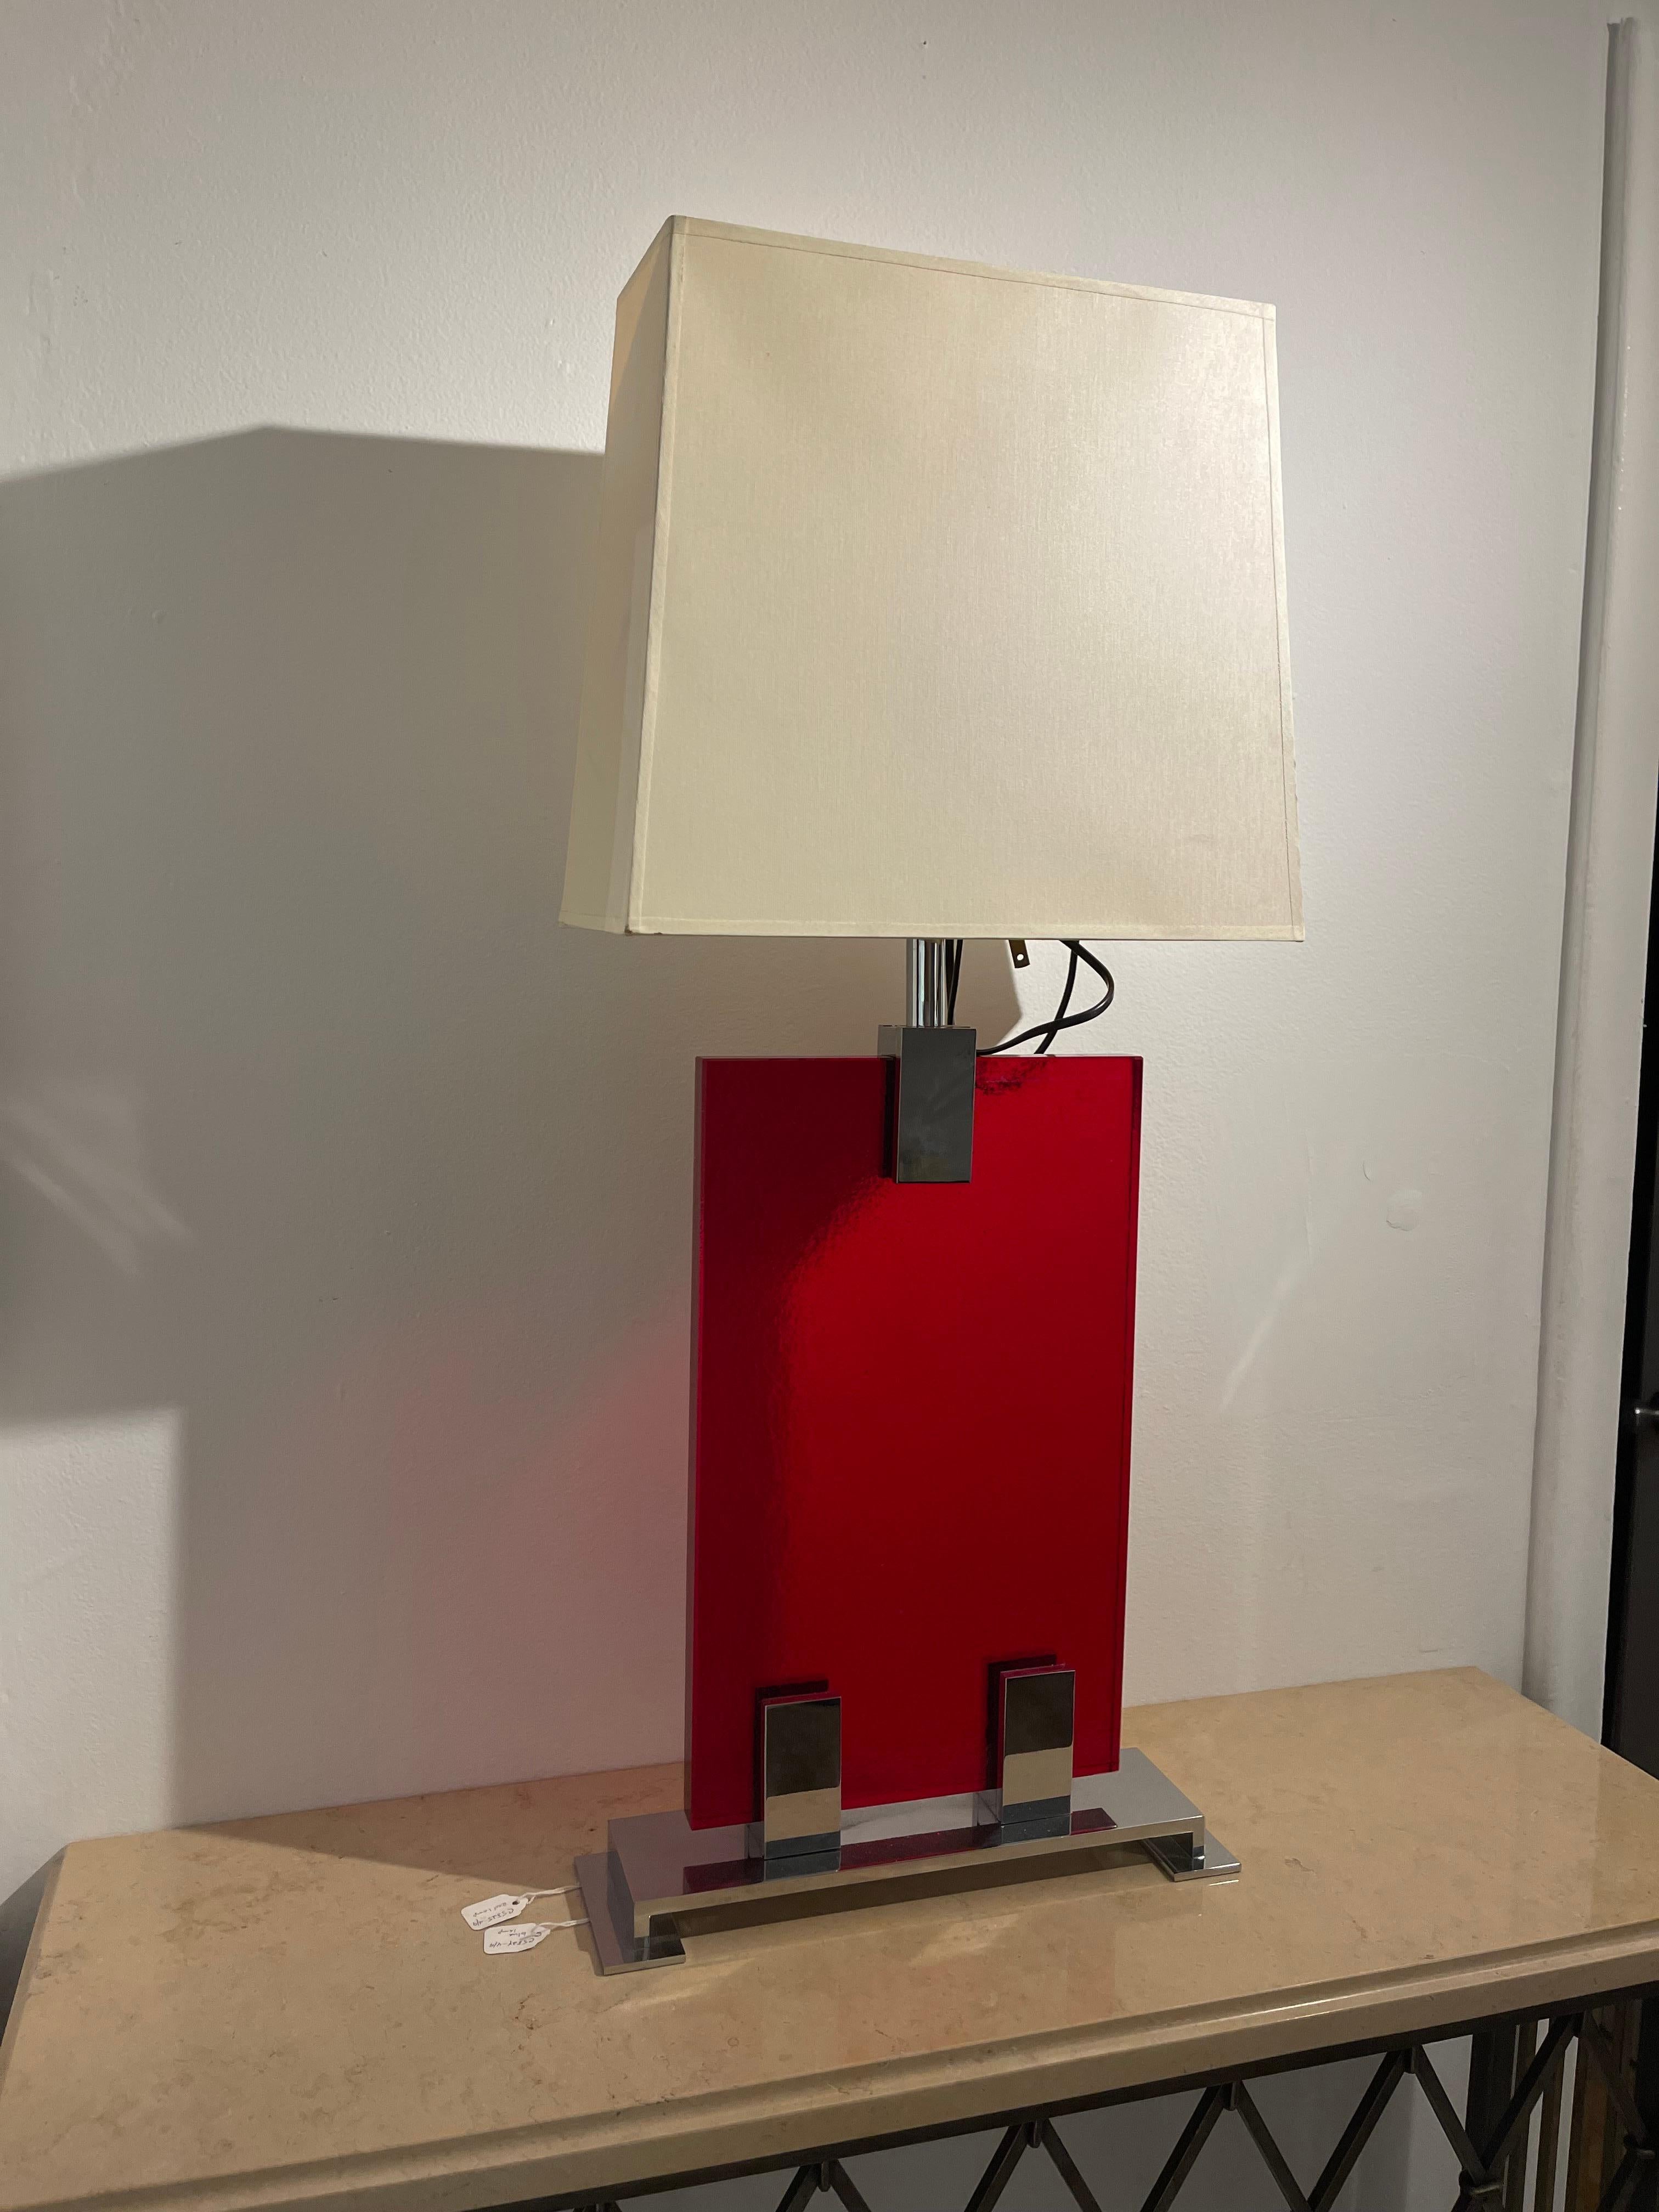 Fabulous mid-century red glass table lamp with an Art Deco flair and very streamlined, chromed details.
